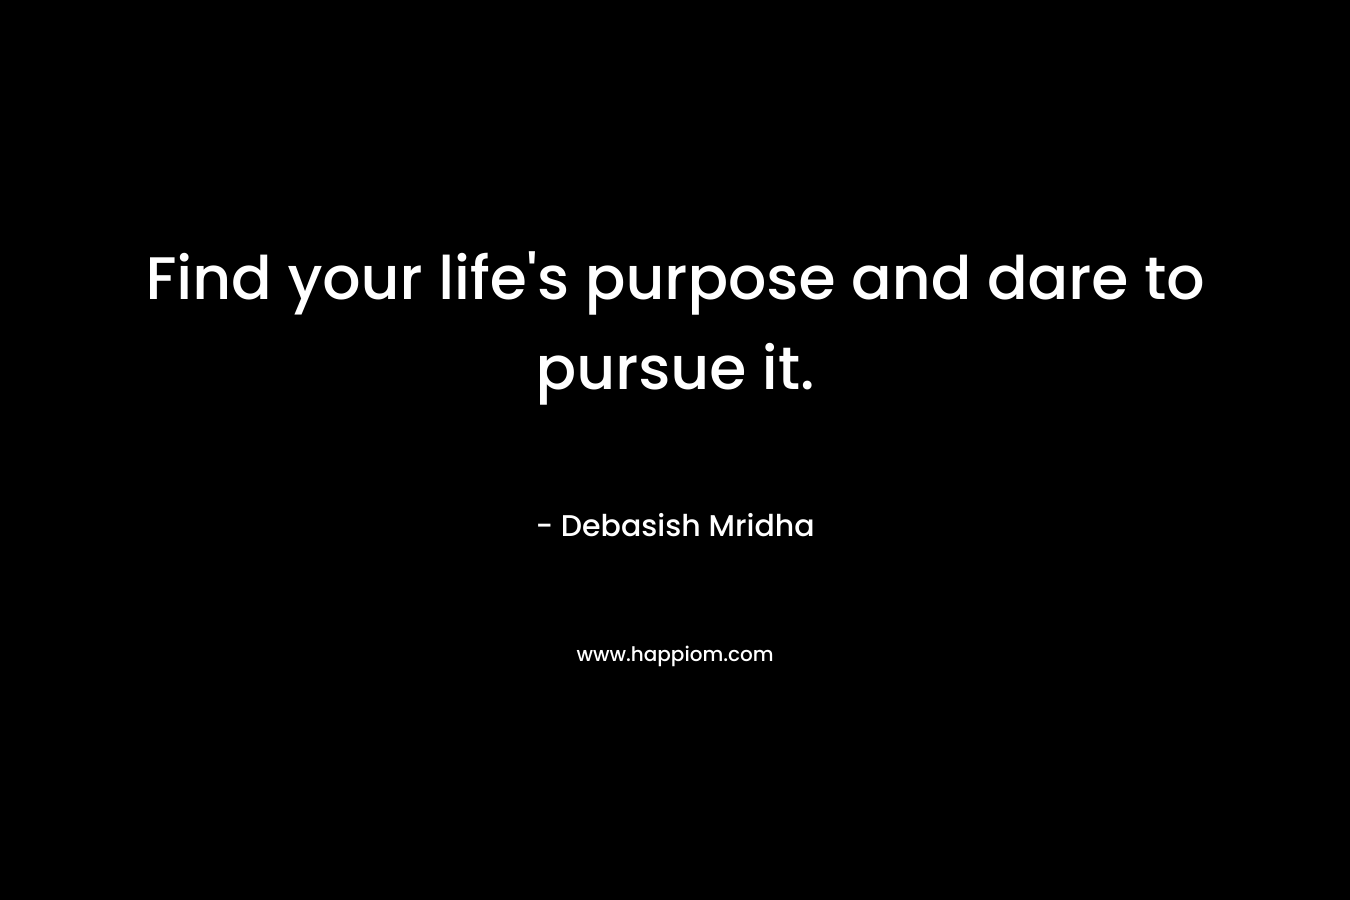 Find your life's purpose and dare to pursue it.